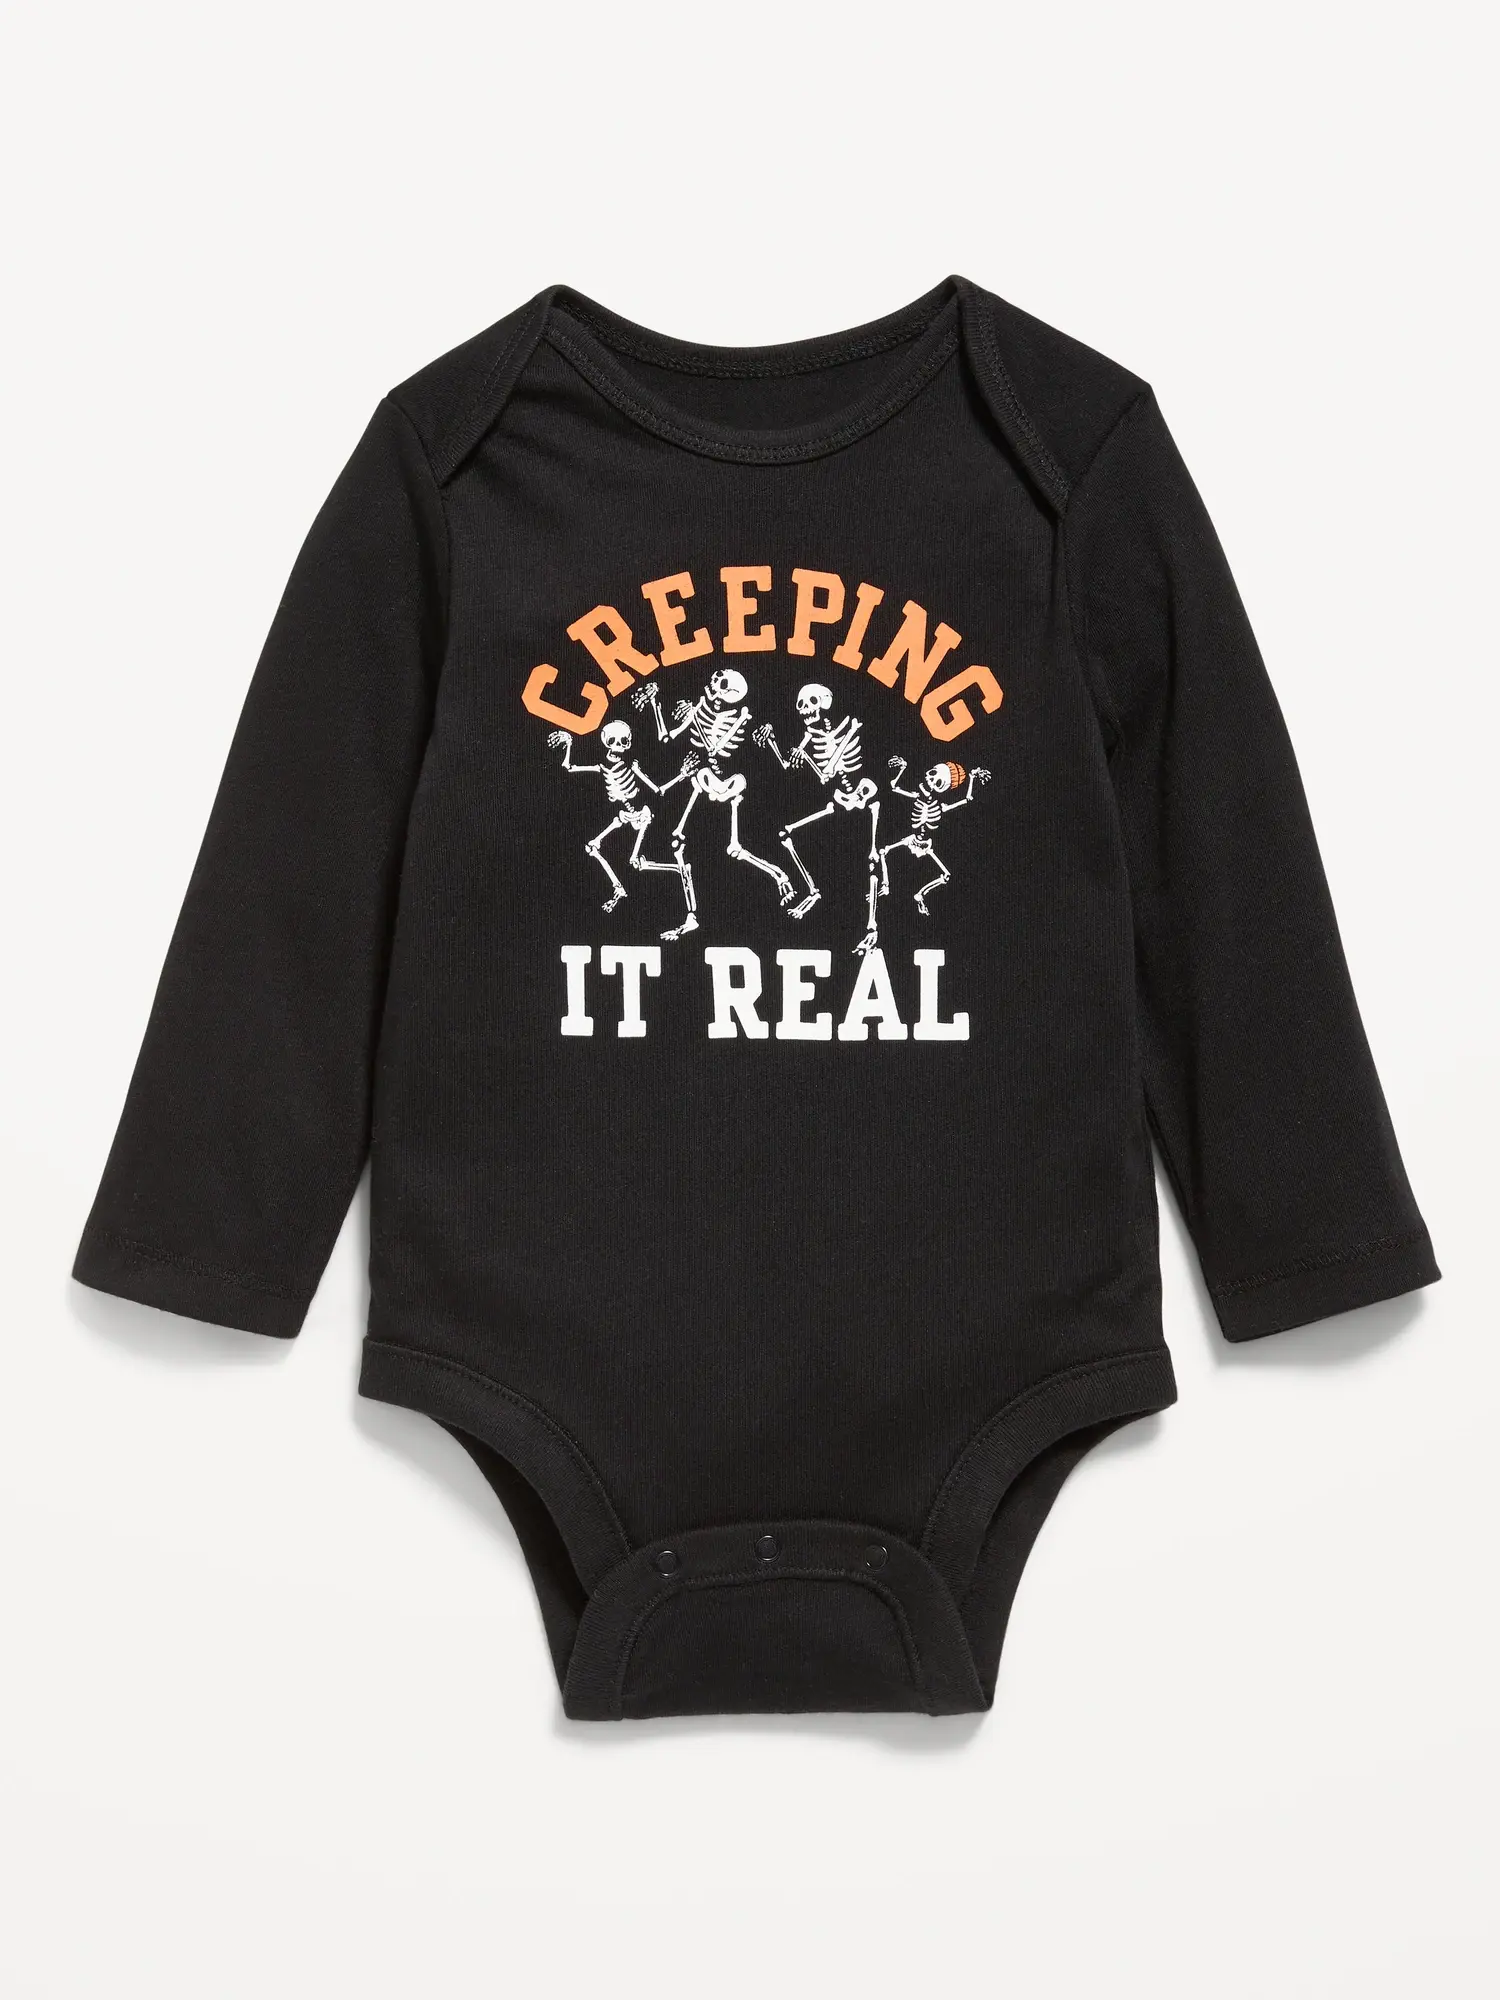 Old Navy Unisex Long-Sleeve Graphic Bodysuit for Baby black. 1